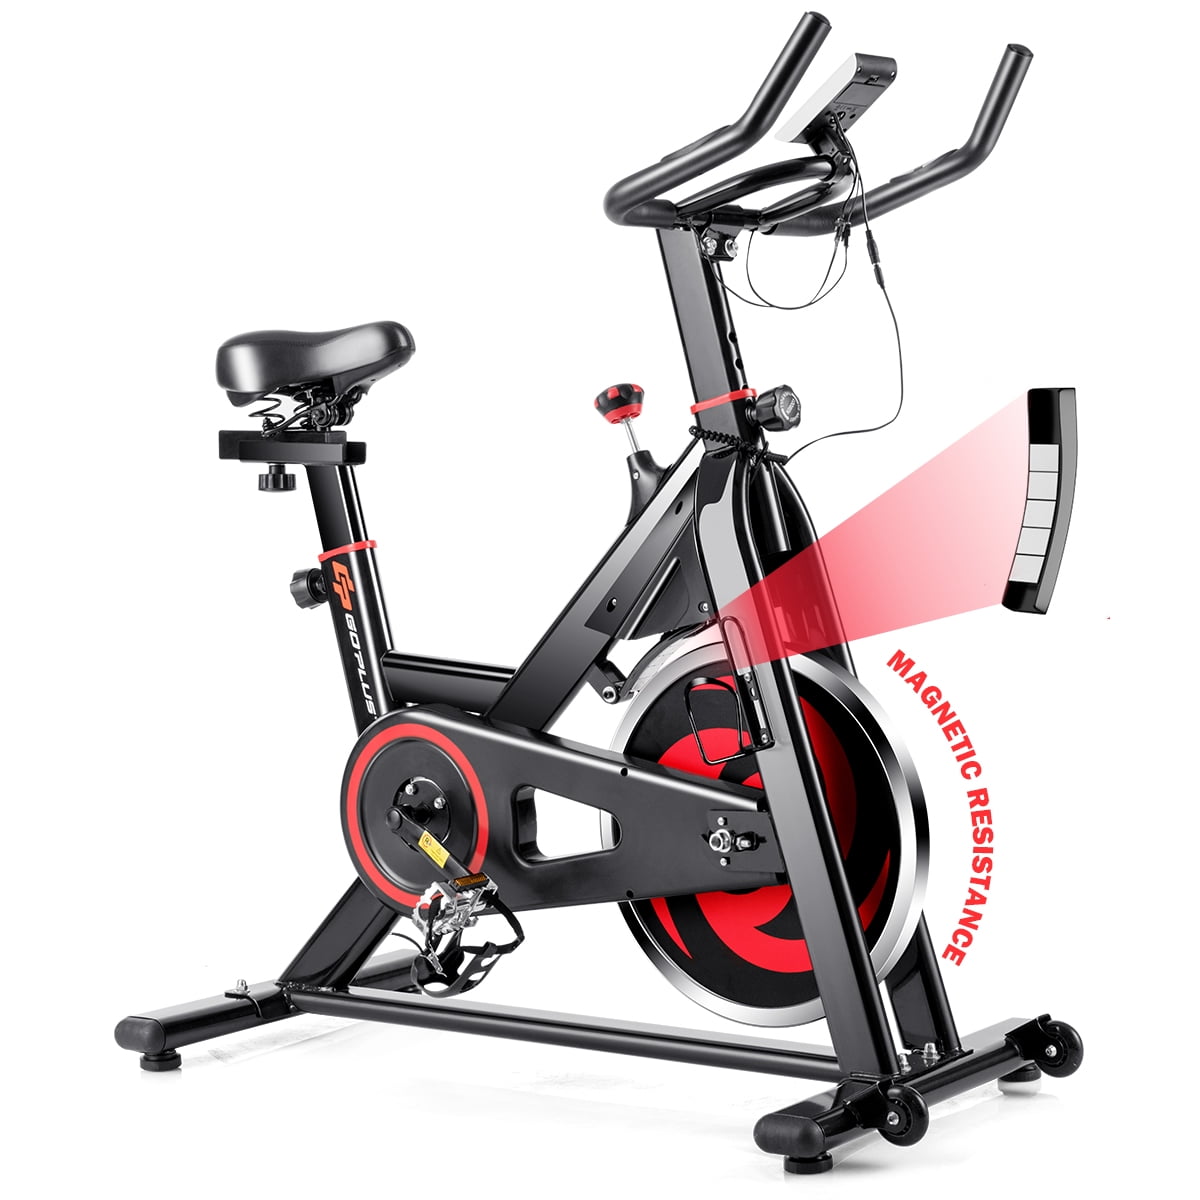 Indoor Stationary Exercise Bike Sport Bicycle Fitness Home Trainning Equipment 